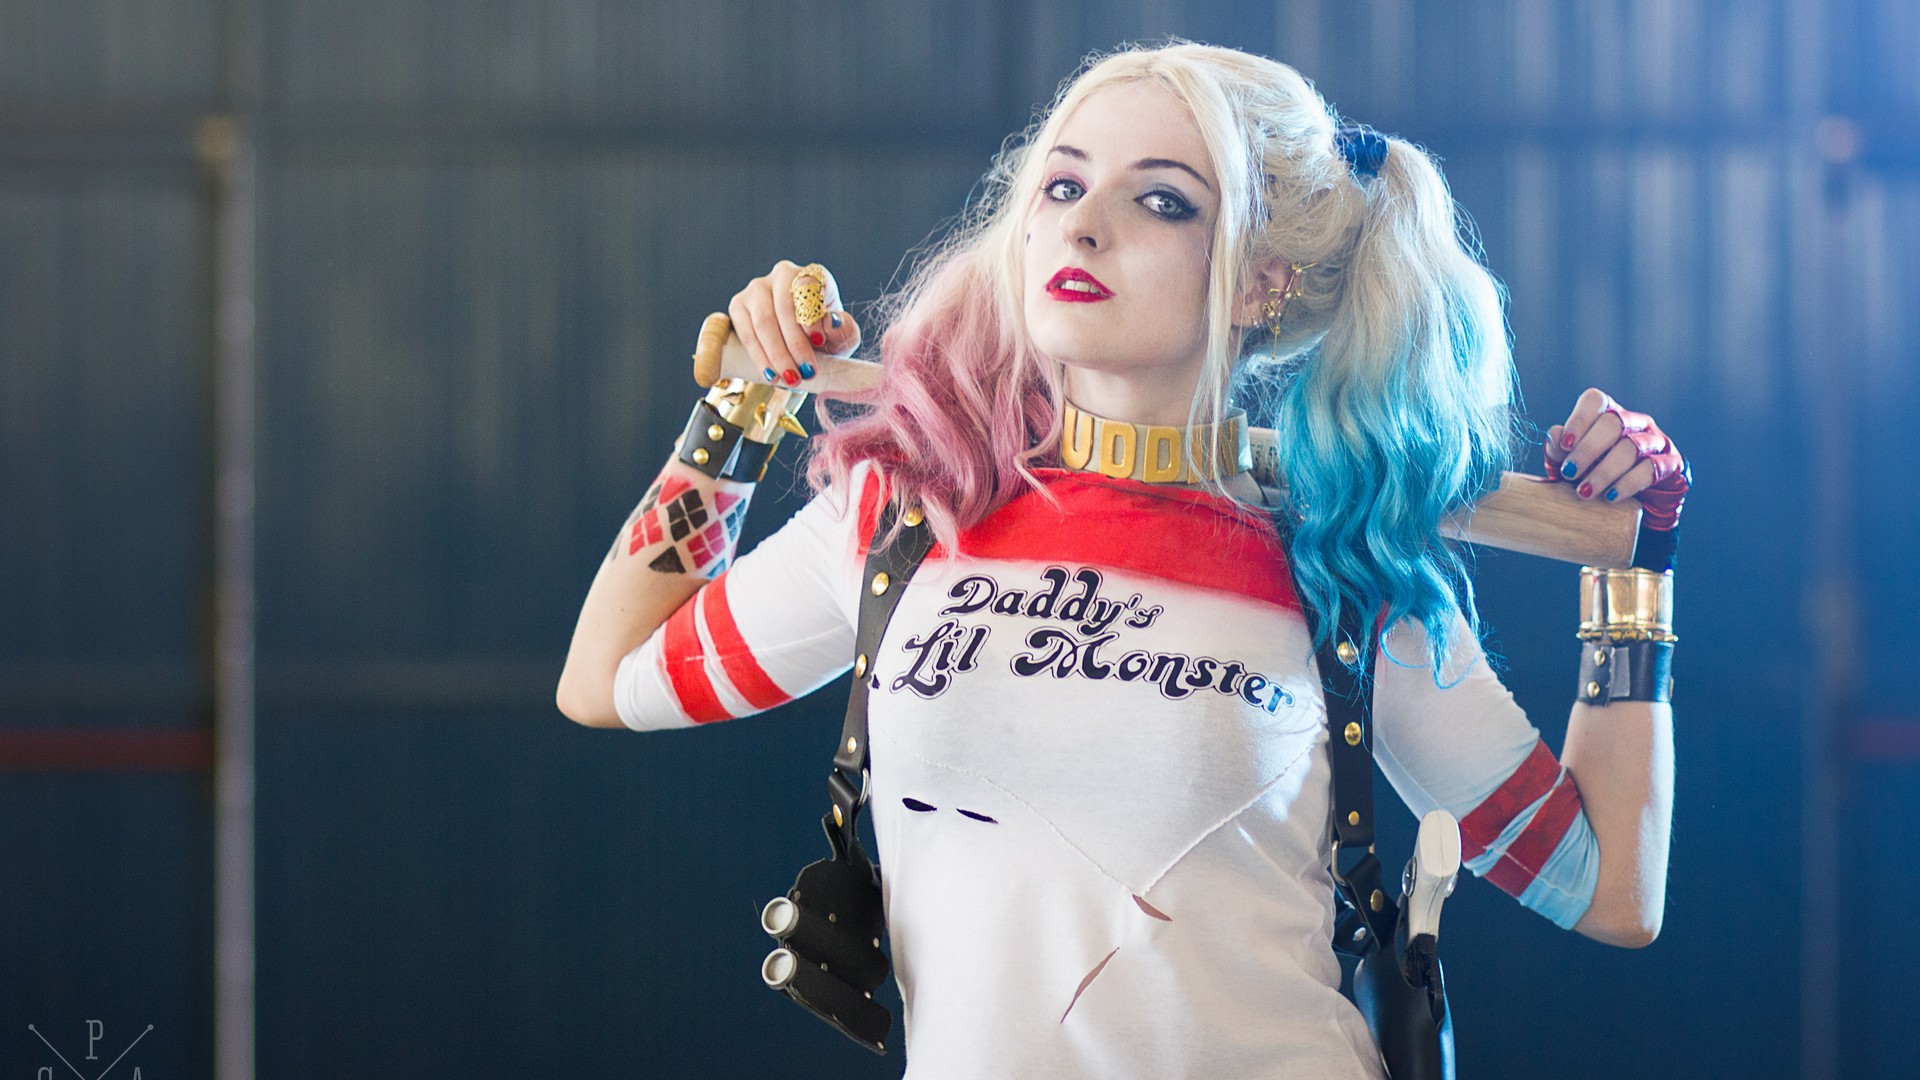 Pictures Of Harley Quinn Hd Wallpaper With Image Resolution - Joker And Harley  Quinn Hd - 1920x1080 Wallpaper 